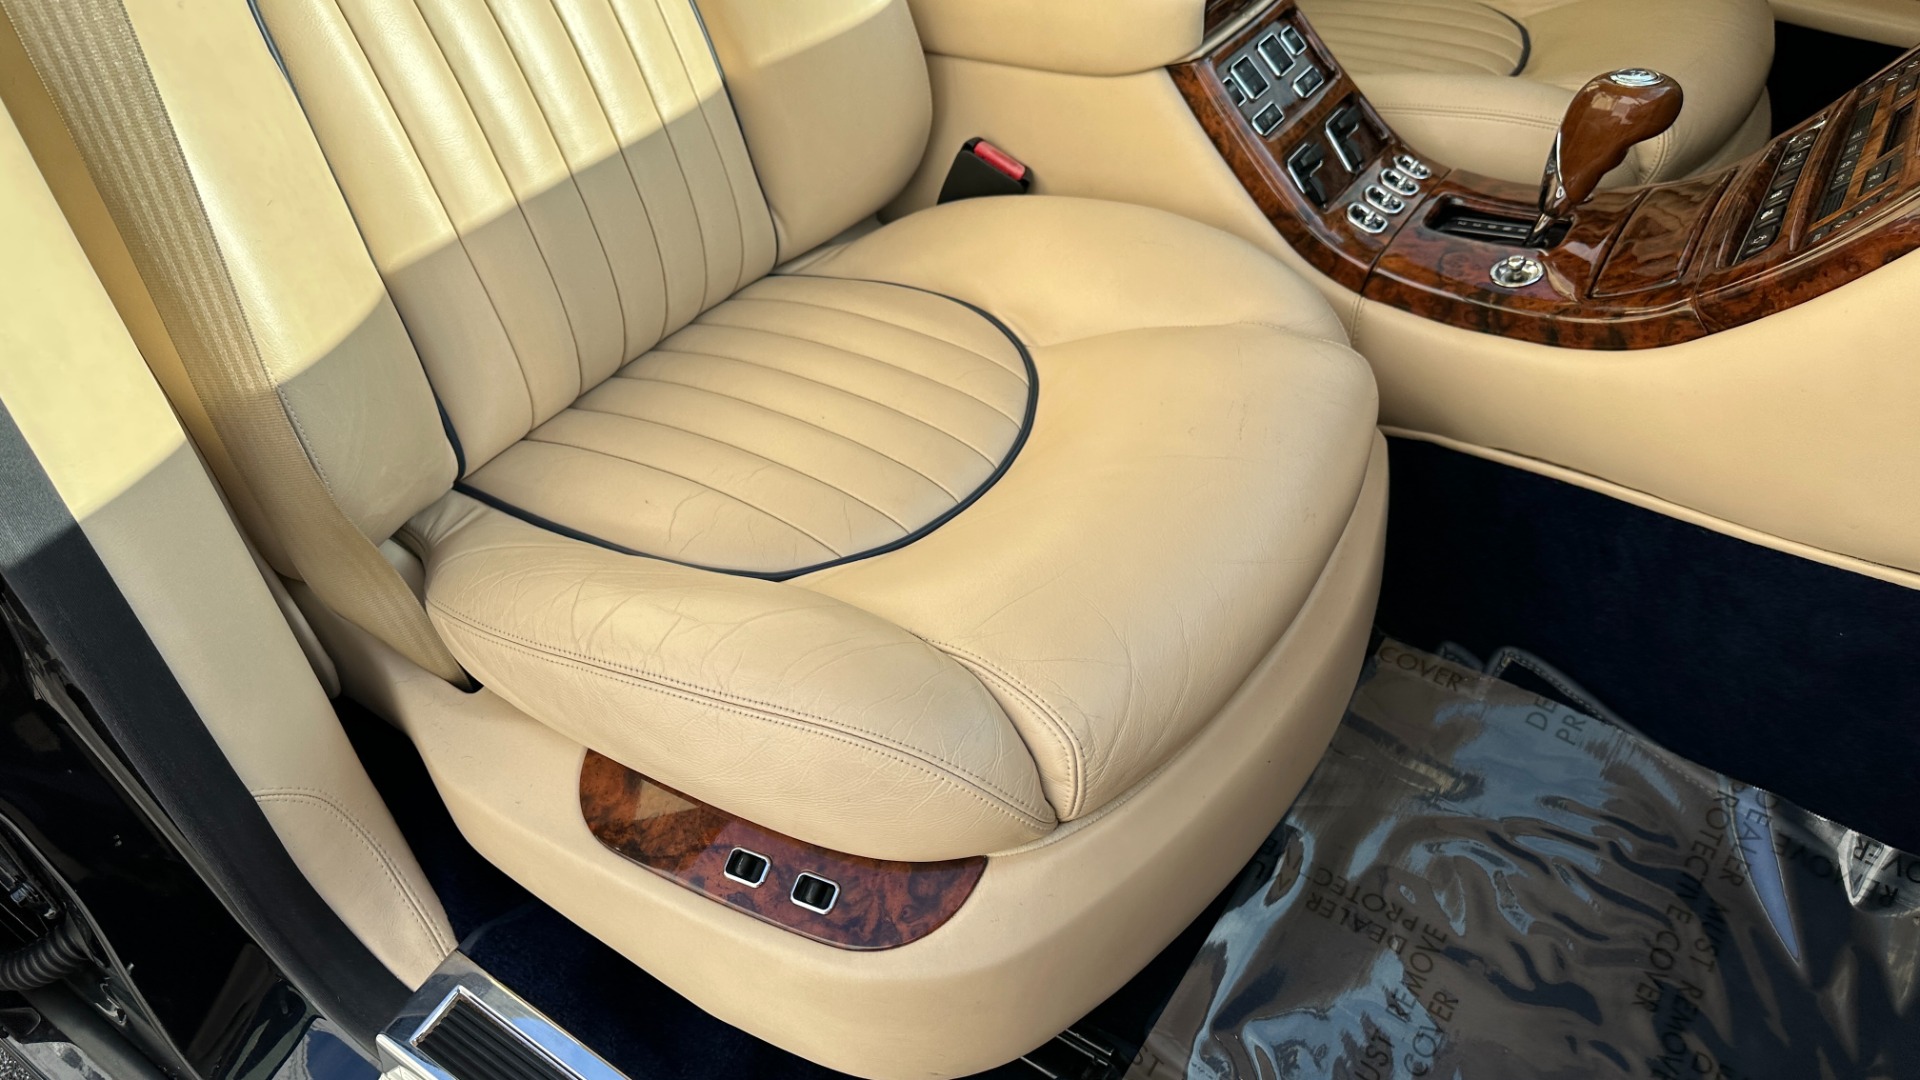 Used 2001 Bentley ARNAGE RED LABEL 6.75L V8 / TURBO / FULL LEATHER / WOOD TRIM / HEATED SEATS / SUNR for sale Sold at Formula Imports in Charlotte NC 28227 14